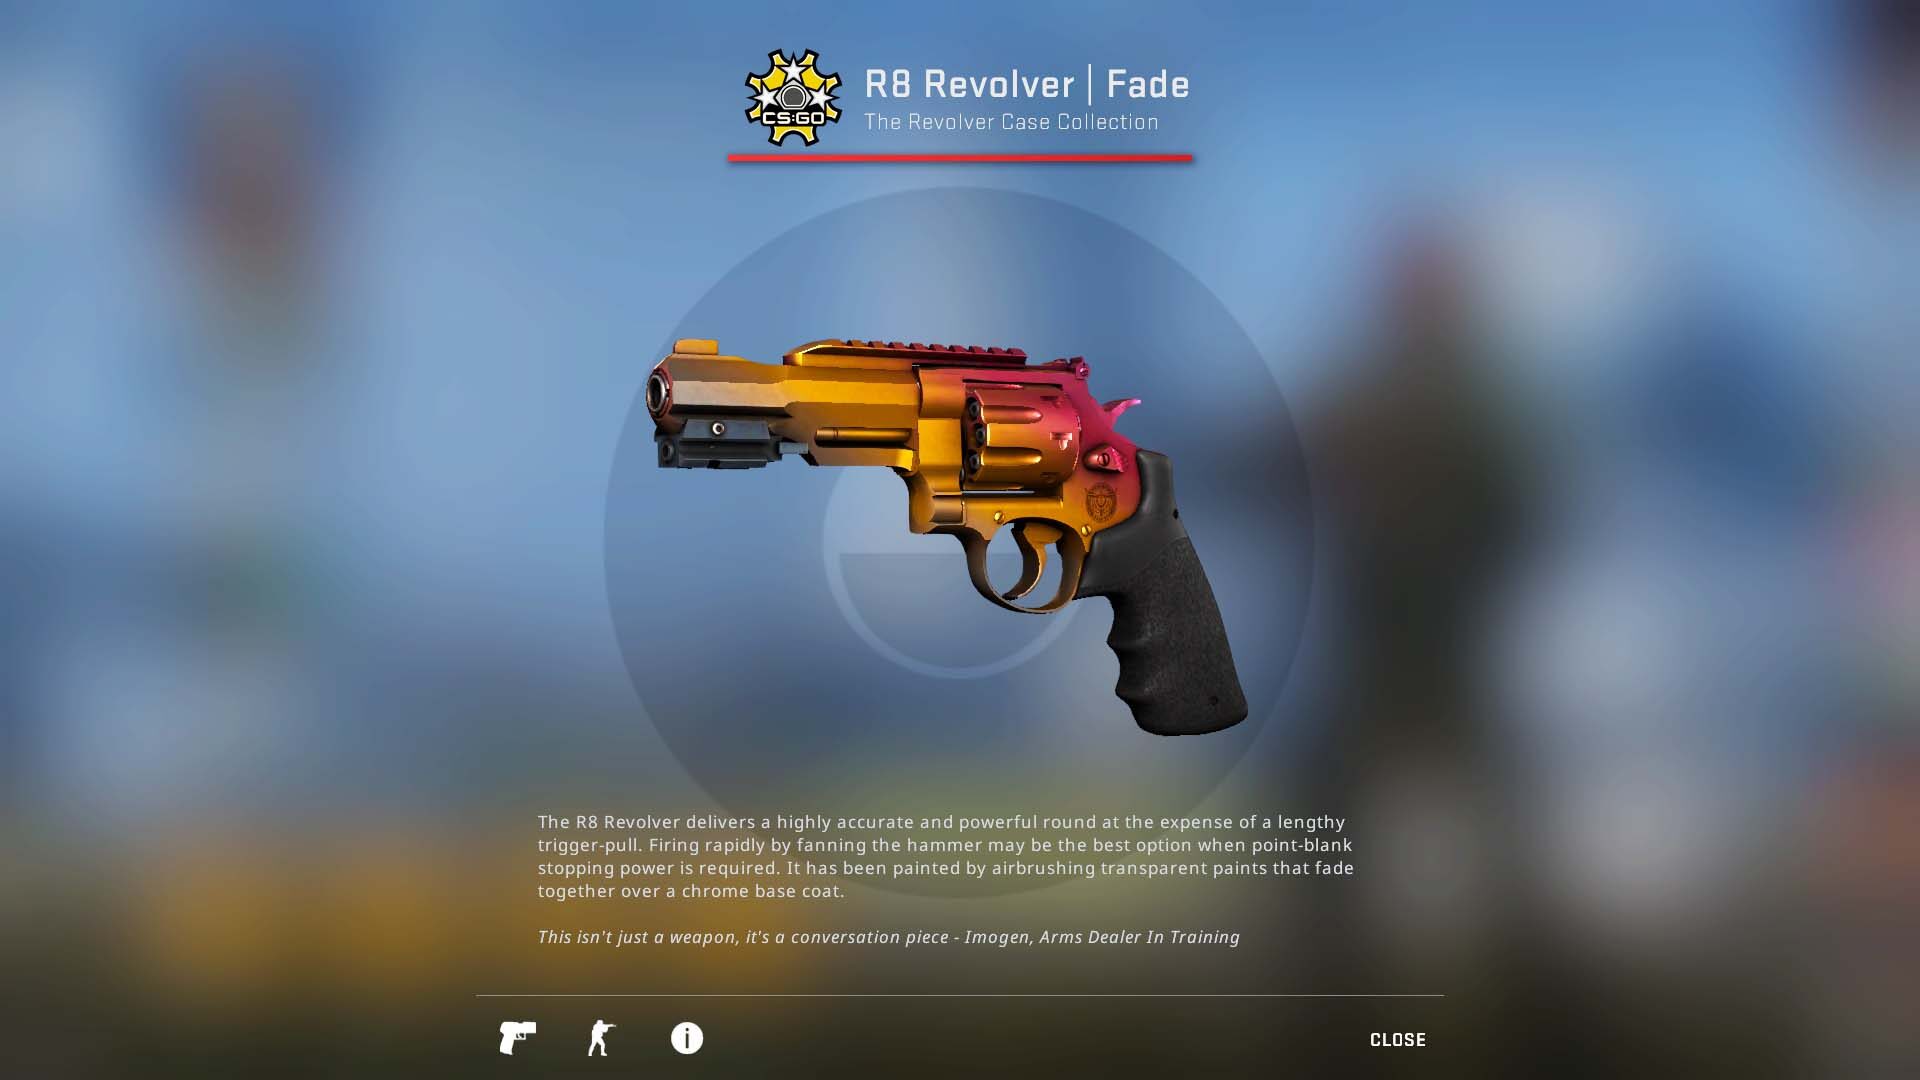 download the last version for apple R8 Revolver Canal Spray cs go skin